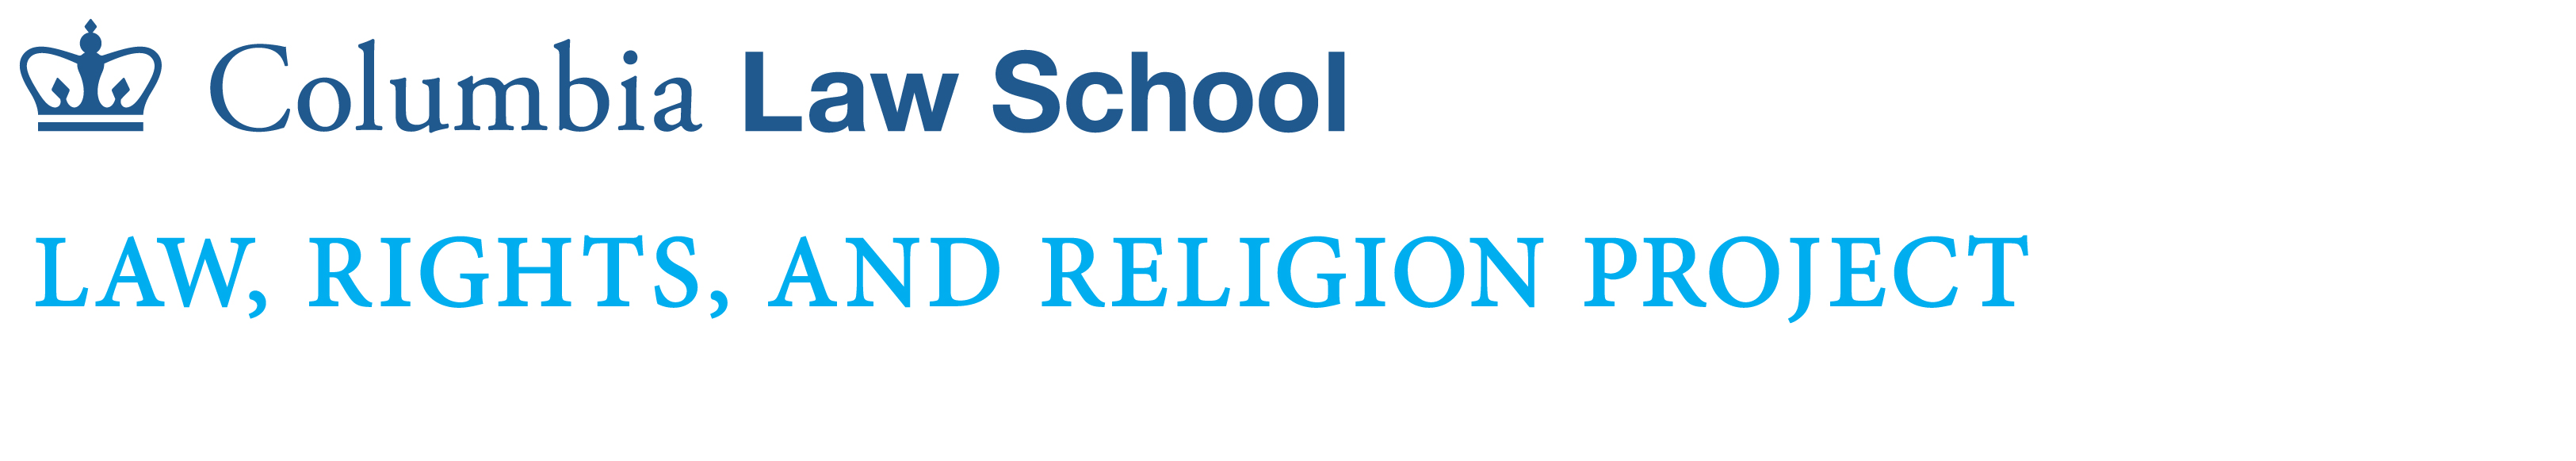 Law, Rights, and Religion Project logo